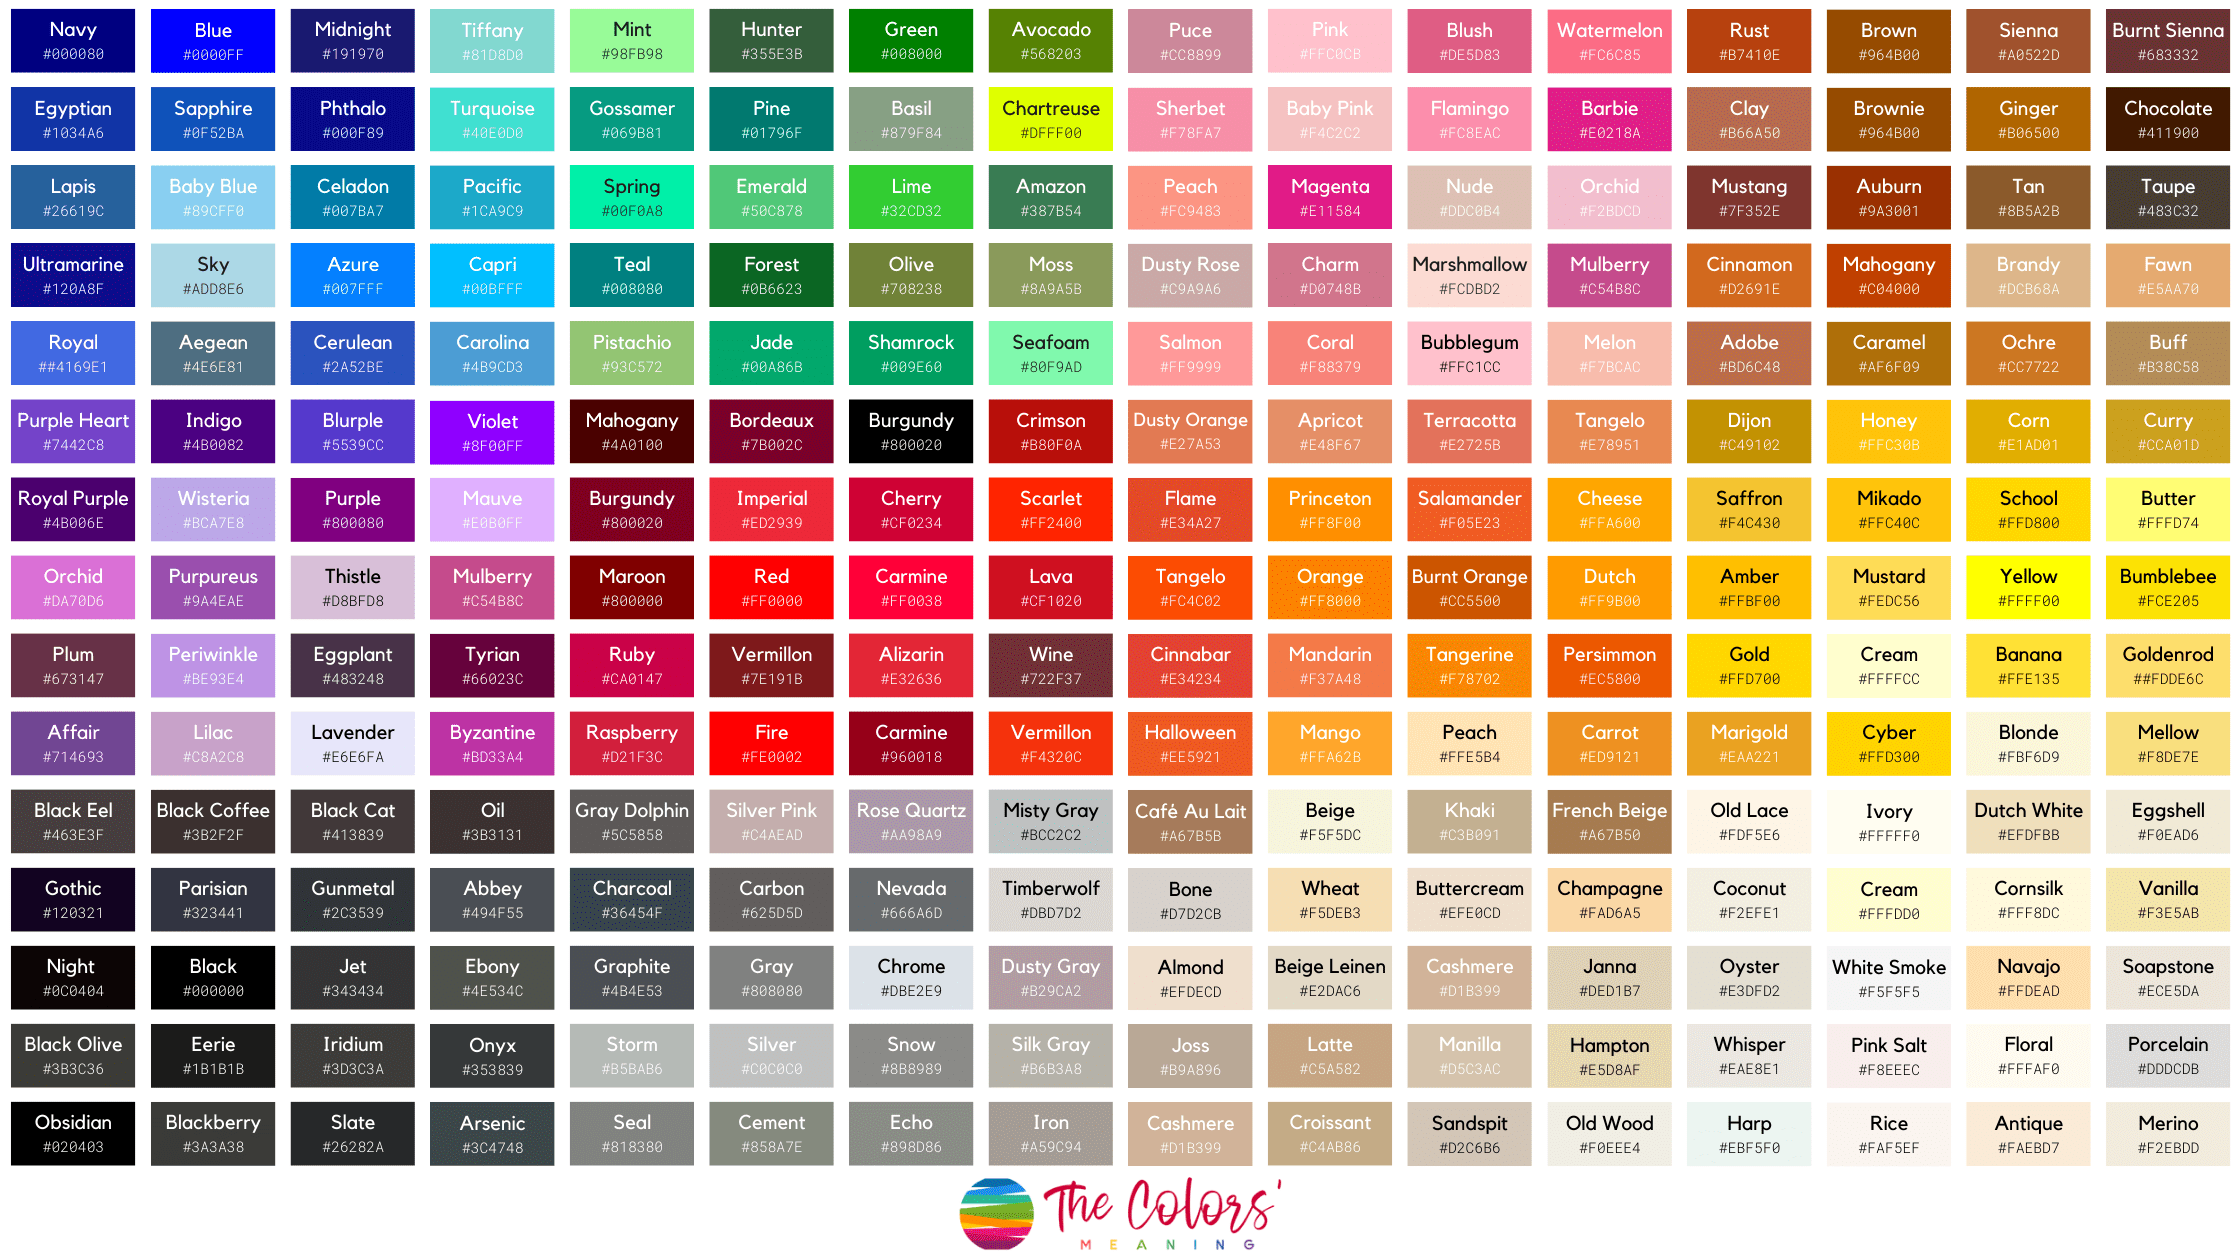 list of colors with color names, hex, RGB & CMYK codes